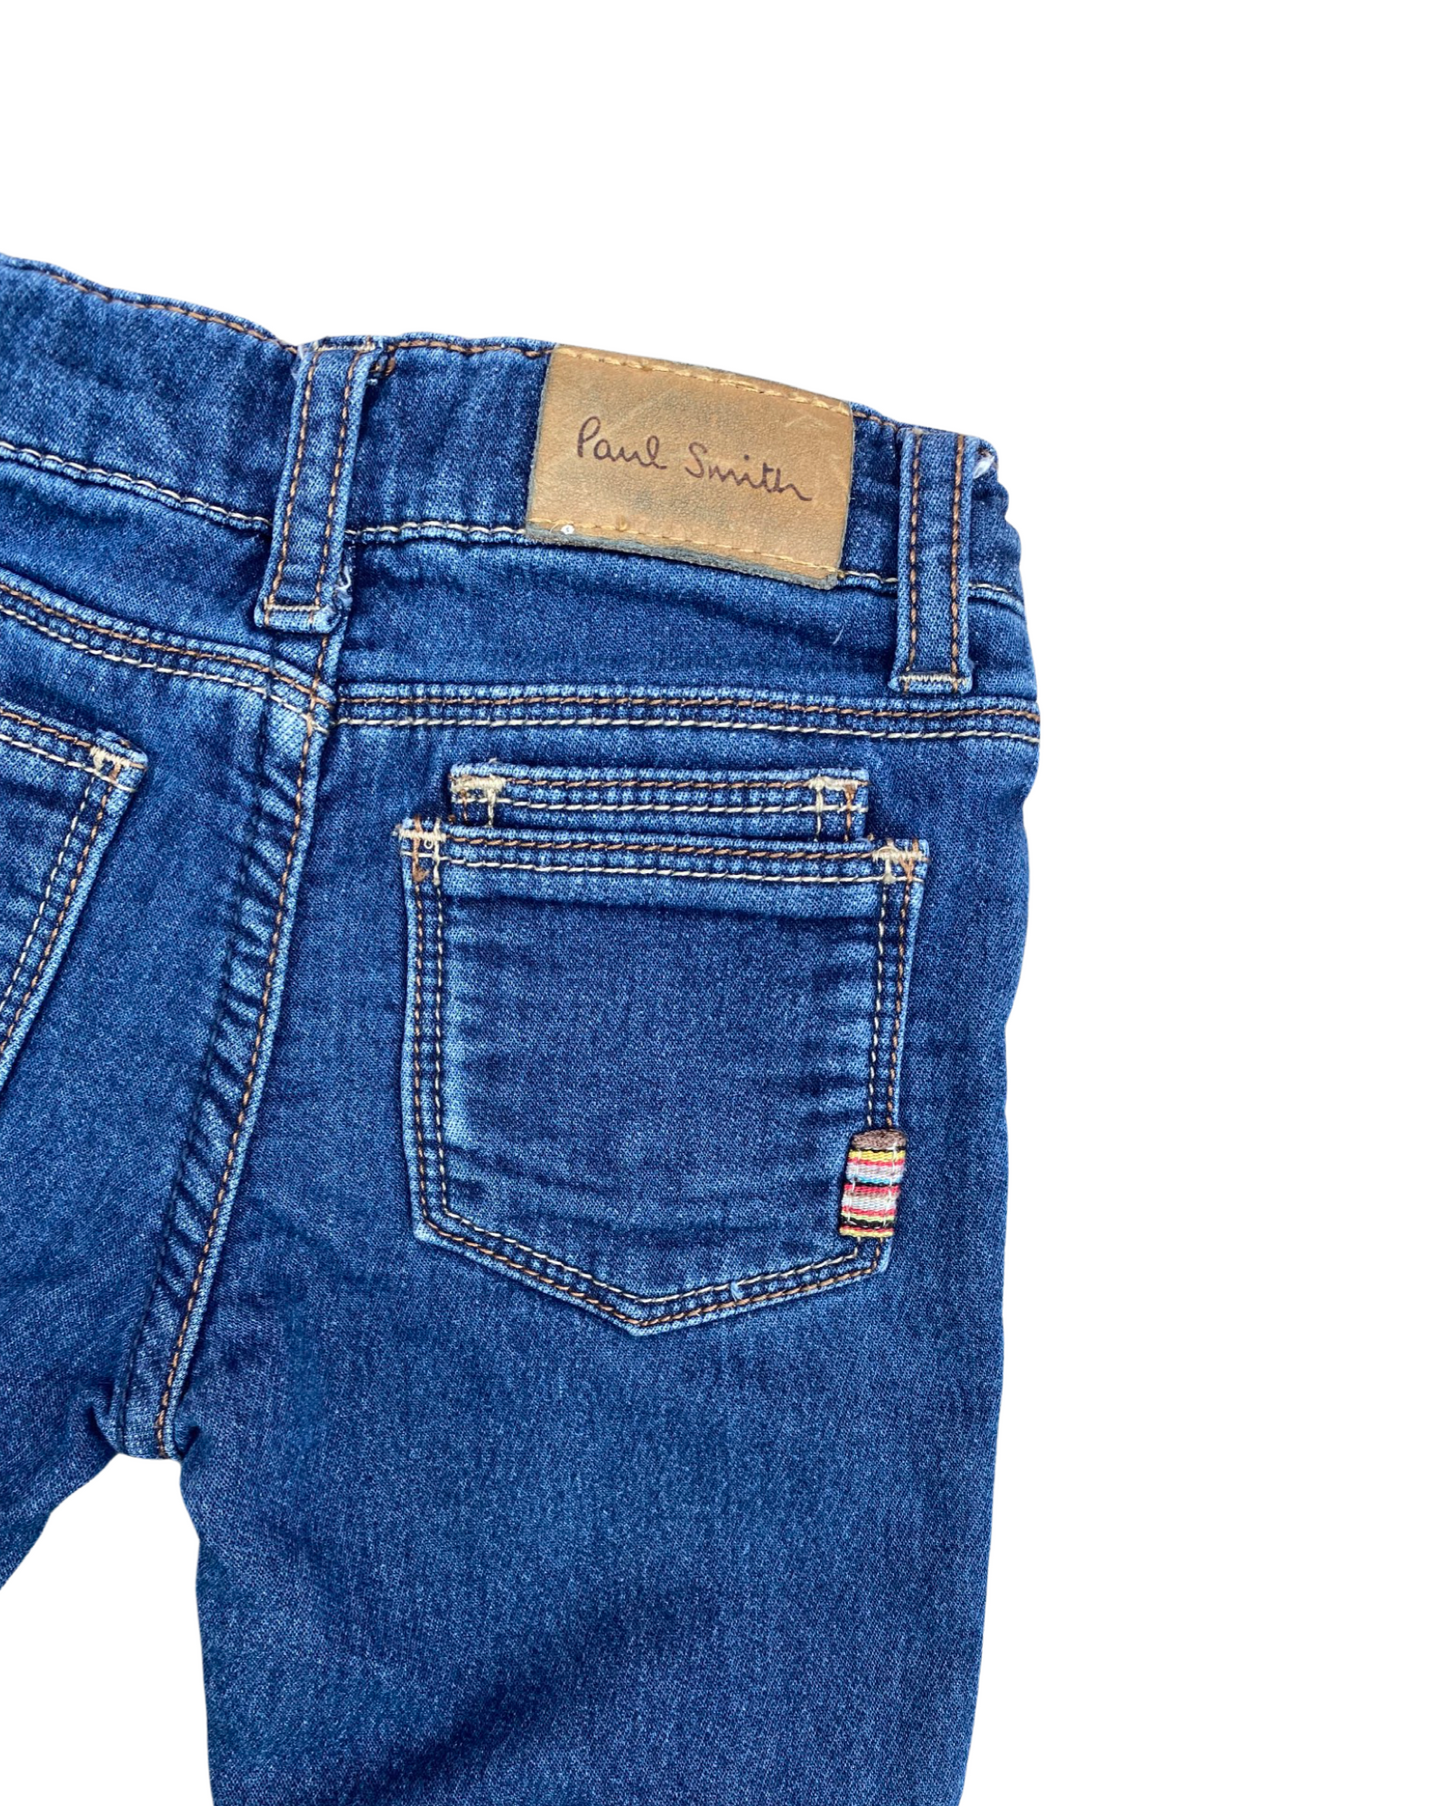 Paul Smith toddler jeans (18-24mths)